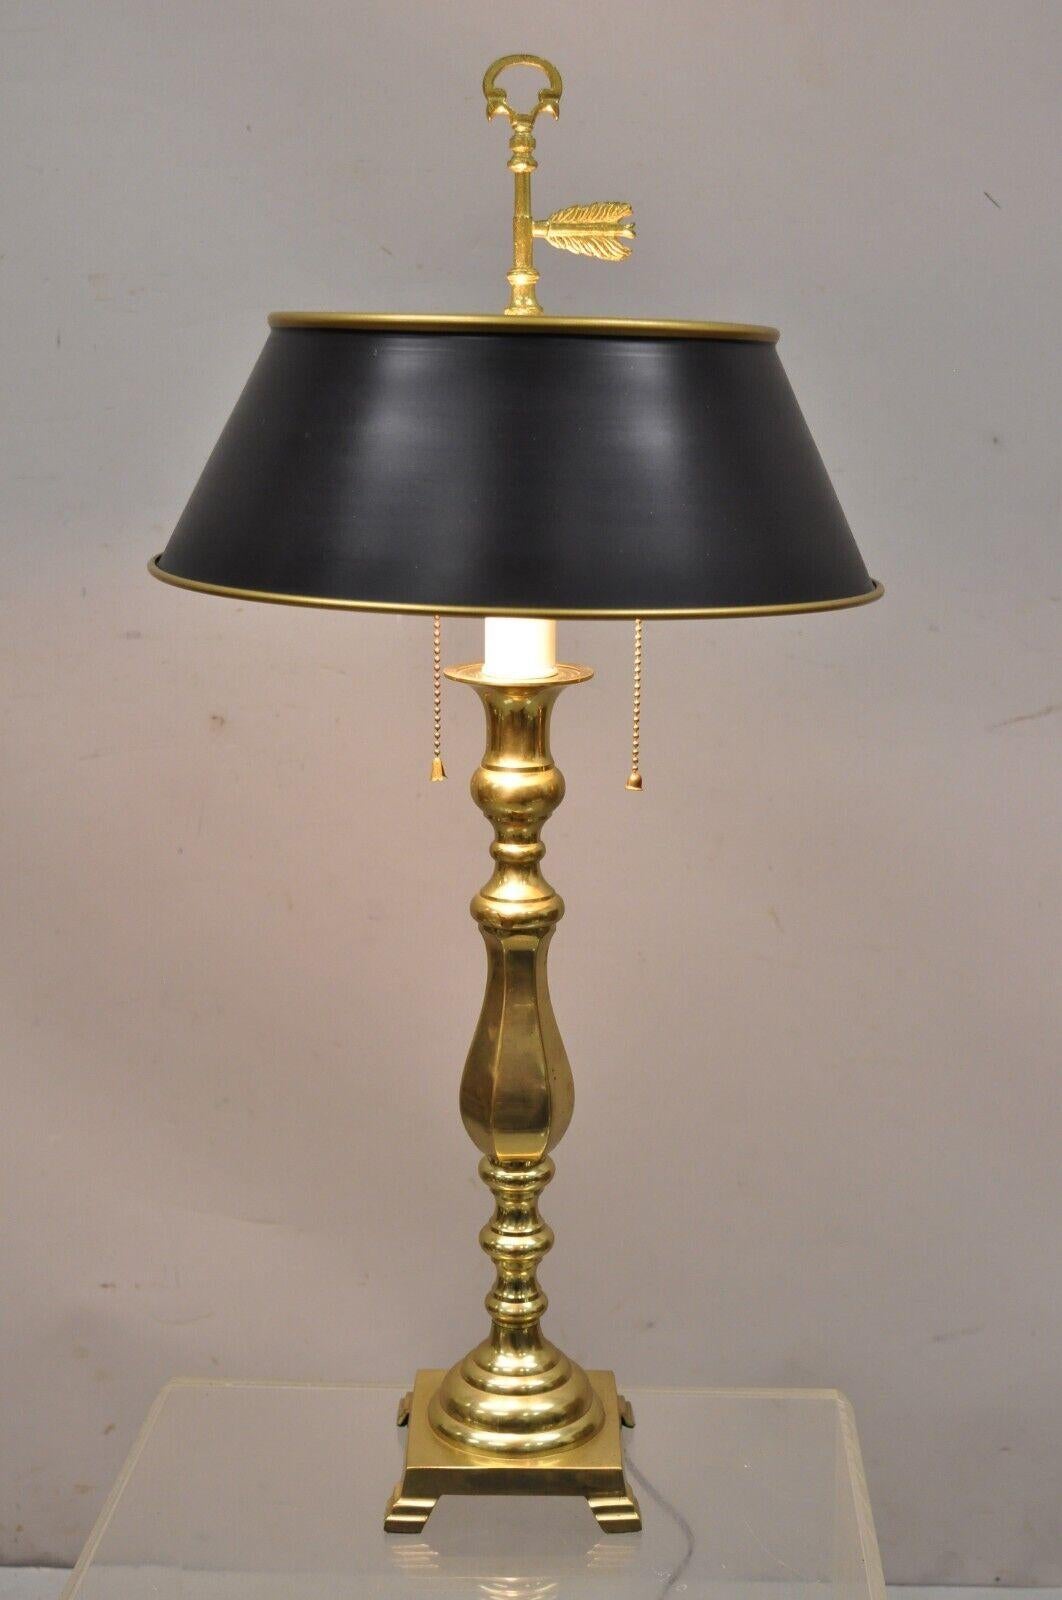 Vintage brass tole metal black tole shade candlestick desk table lamp. Item features twin light sockets, brass frame, quality craftsmanship, great style and form. Circa late 20th century. Measurements: 29